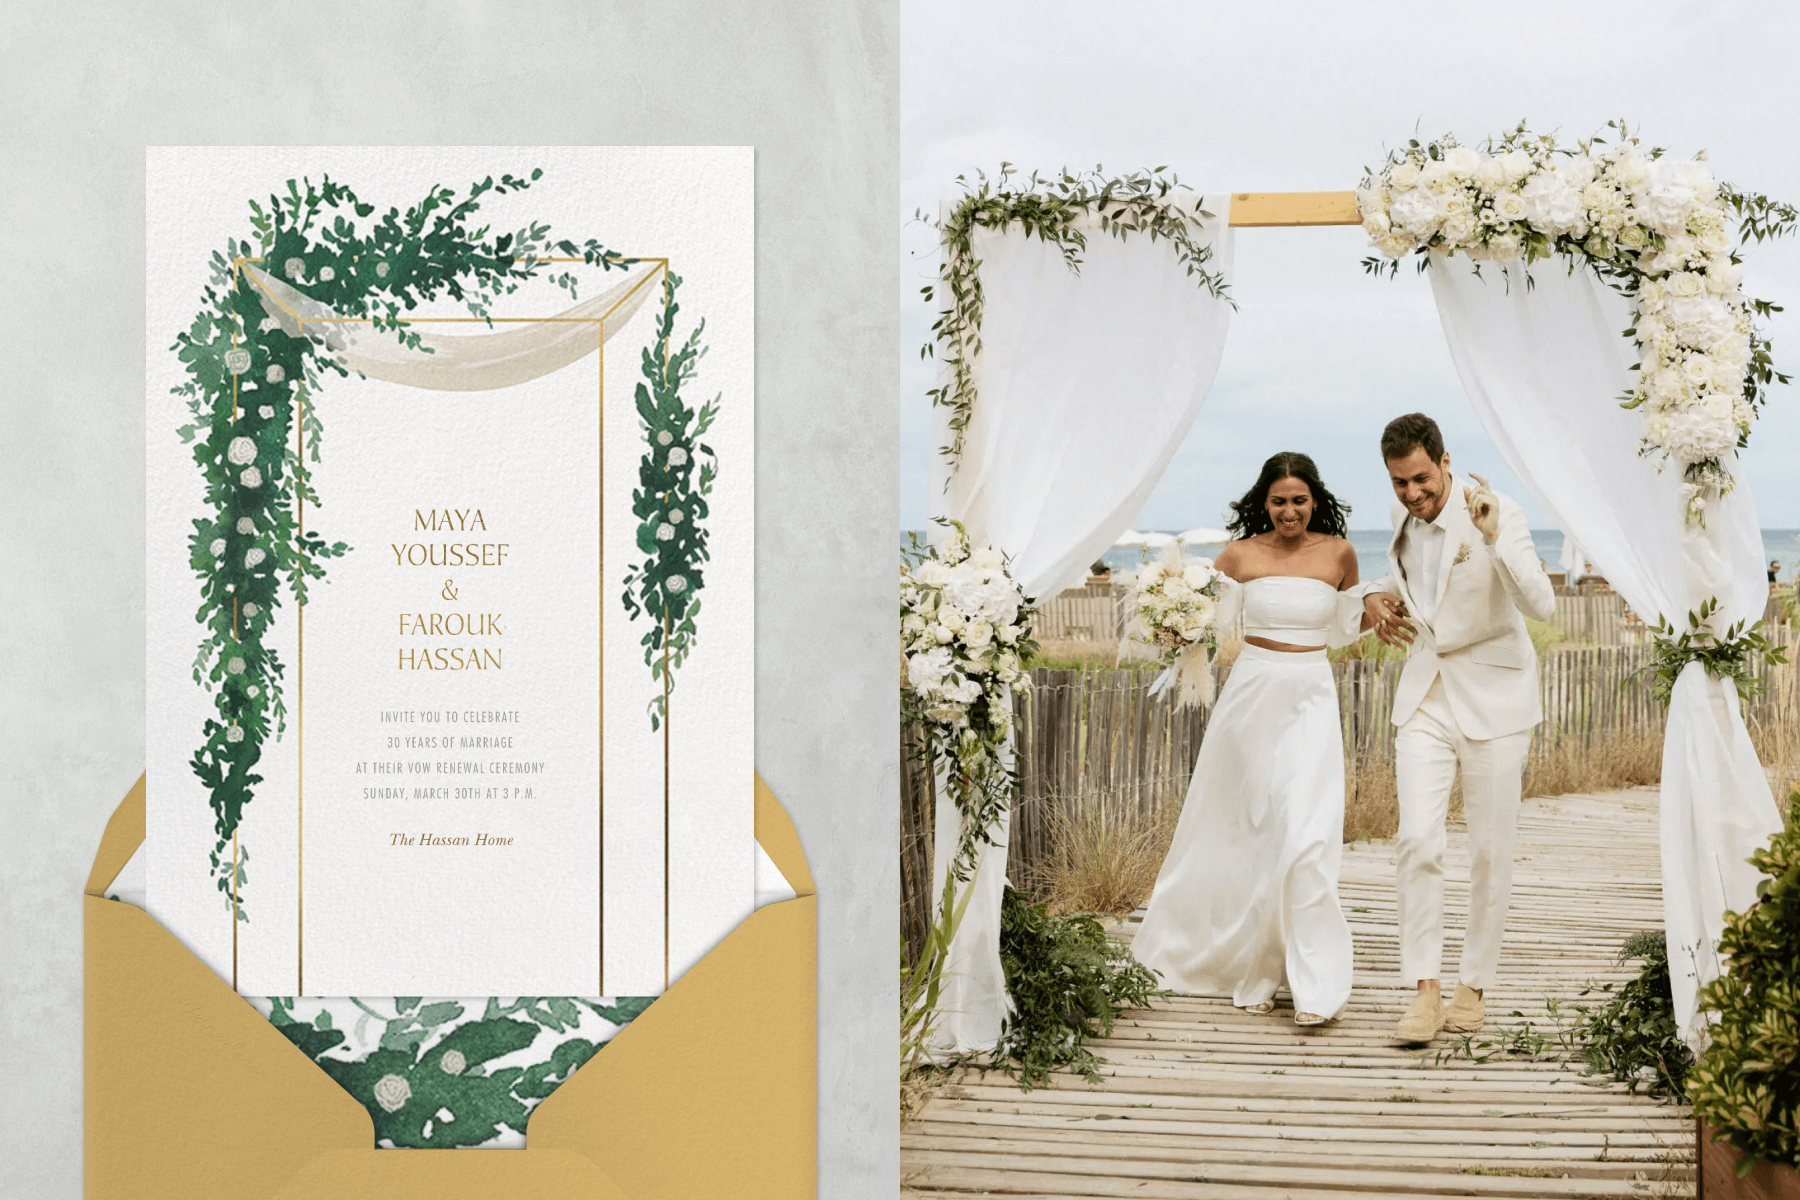 Left: A wedding invitation with a thin gold wedding canopy draped with sheer white fabric and greenery installations. Right: a newly wed couple dressed in white walk in a celebratory fashion on a beach boardwalk under a wooden frame with sheer white curtains and white floral installations.